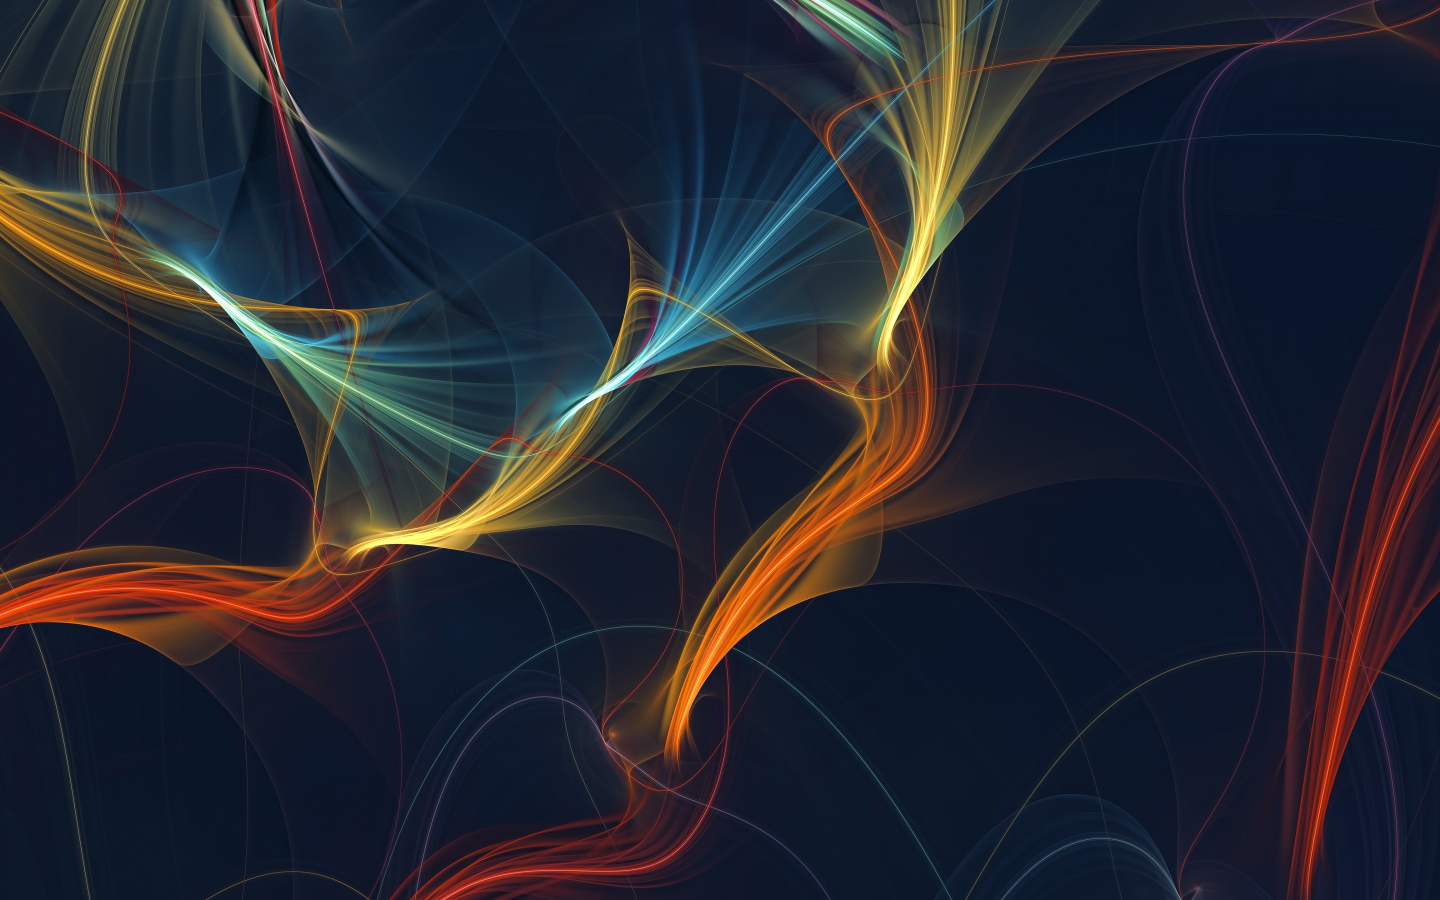 Download wallpaper 1440x900 abstract, colorful lines, minimal, 1440x900  widescreen 16:10 hd background, 24578